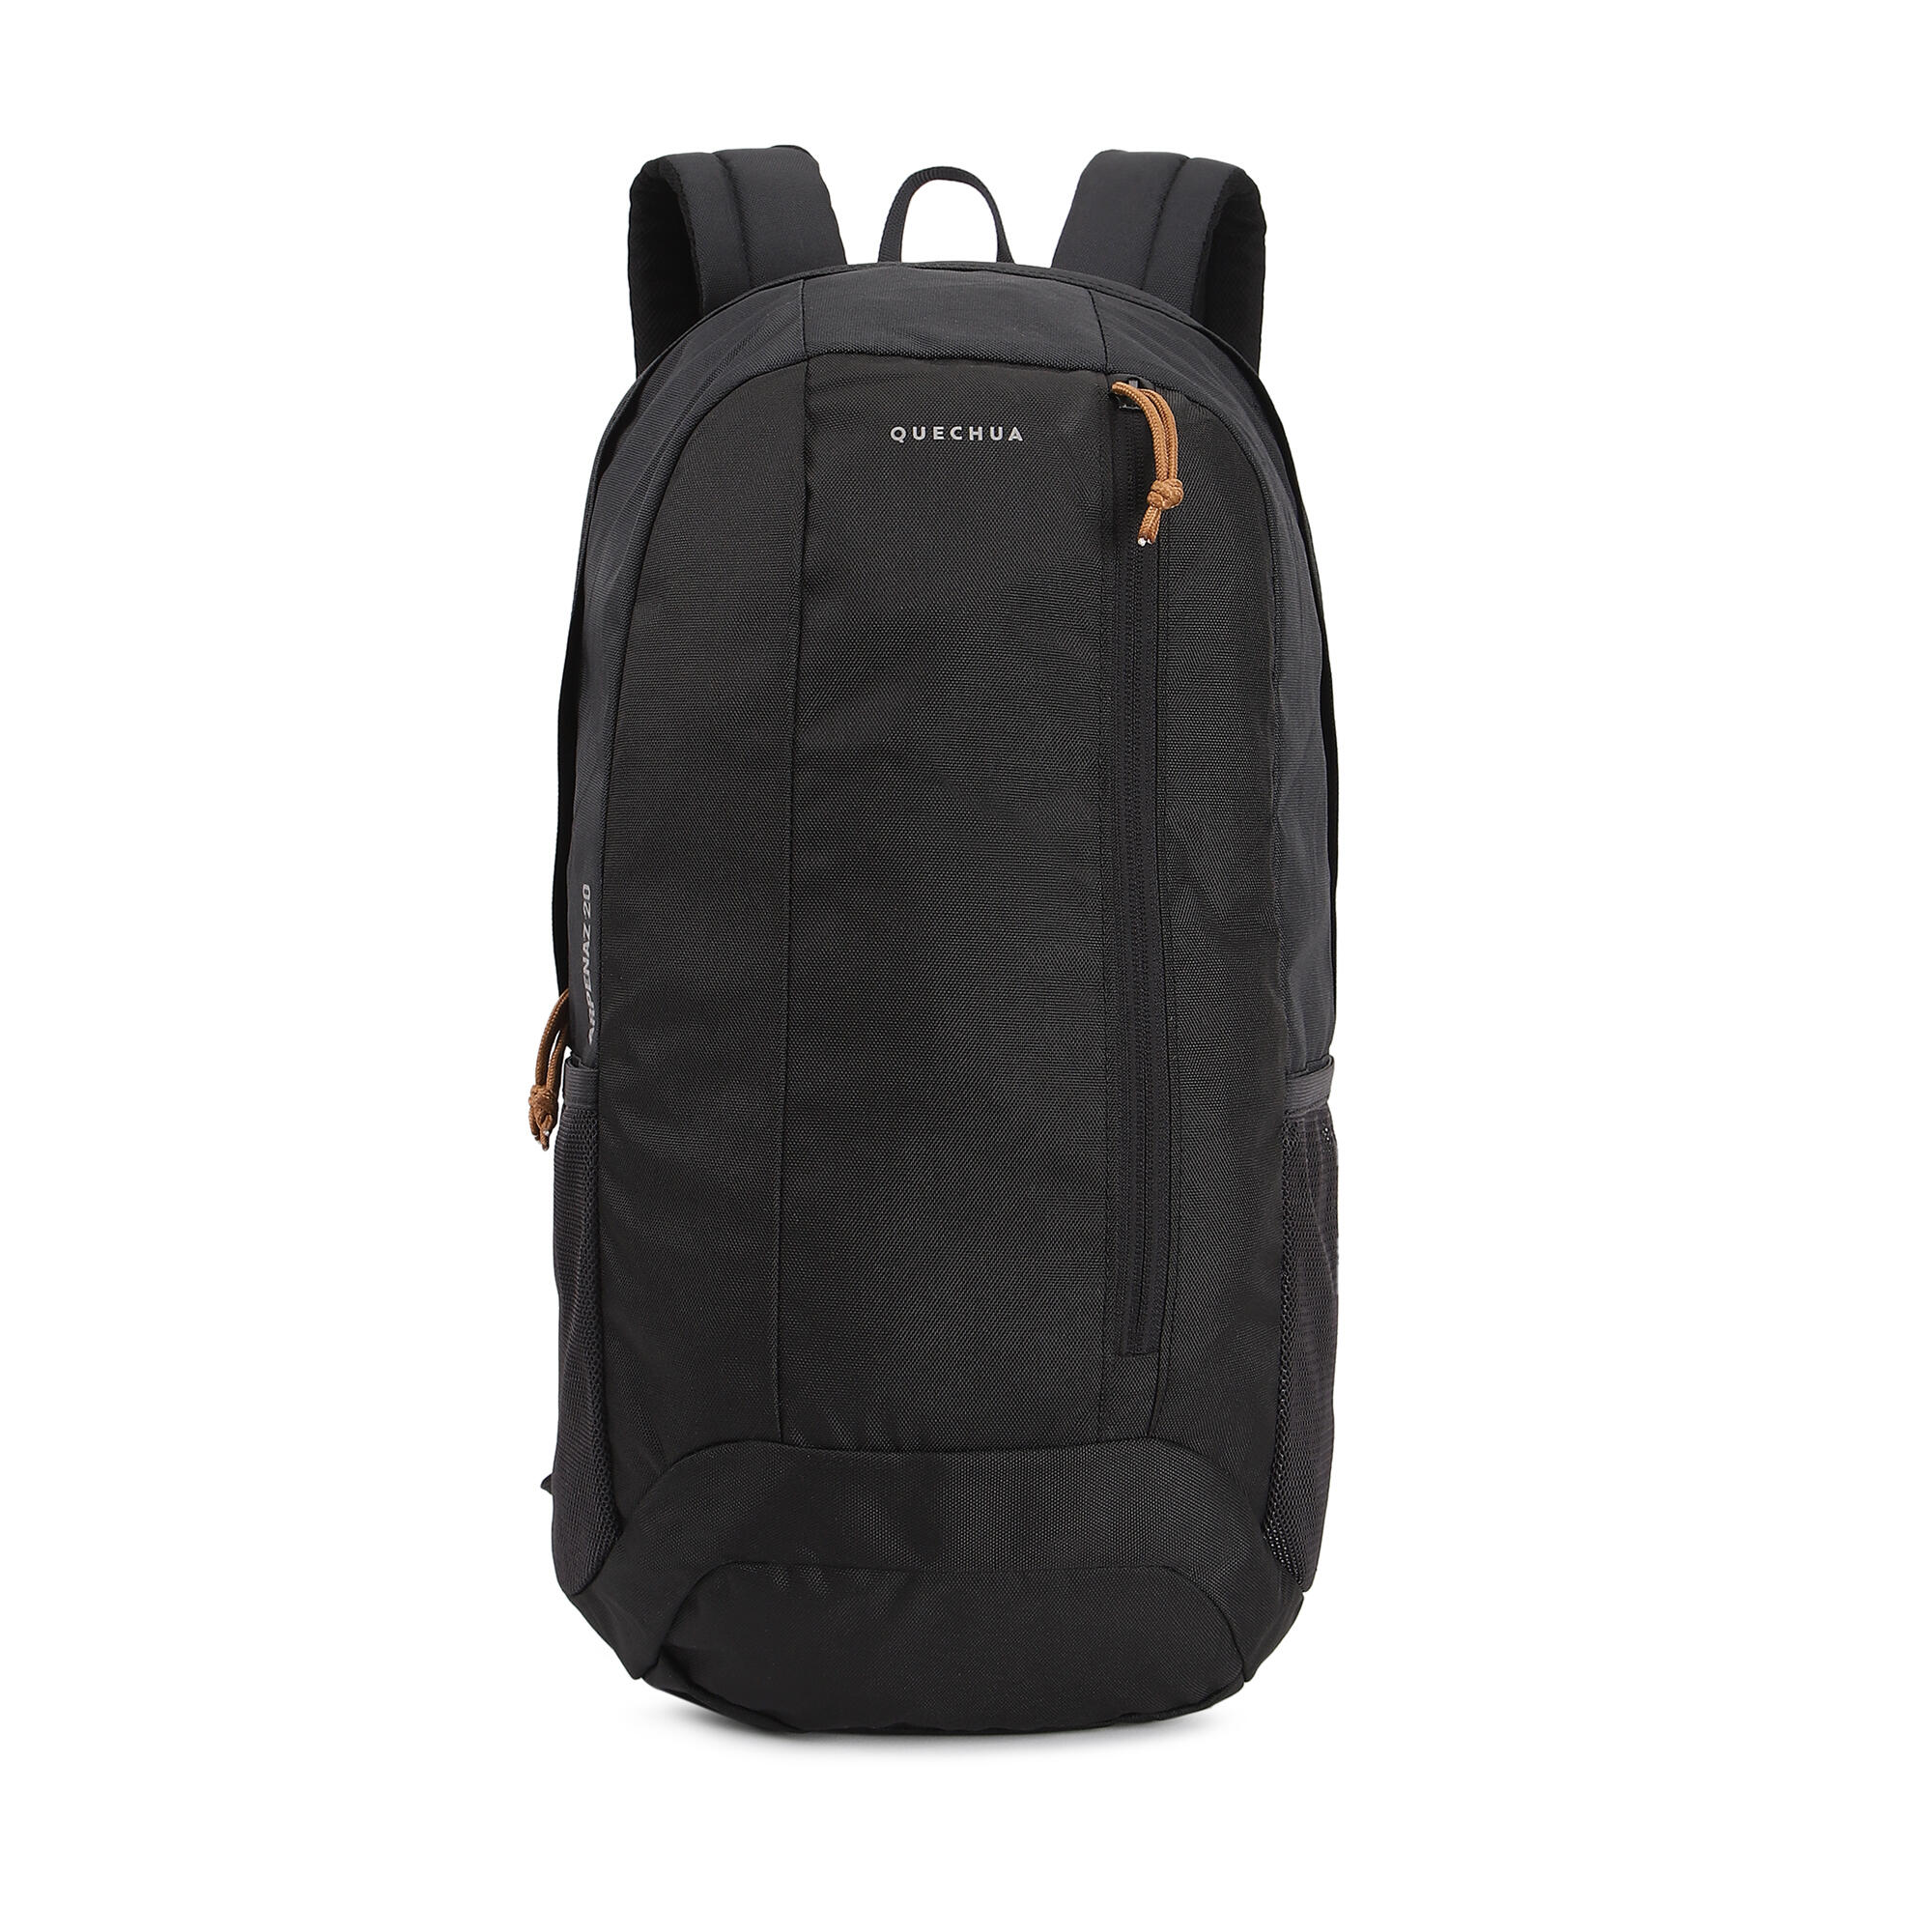 Decathlon Quechua NH100 Hiking Backpack 10 Litre | Shopee Philippines